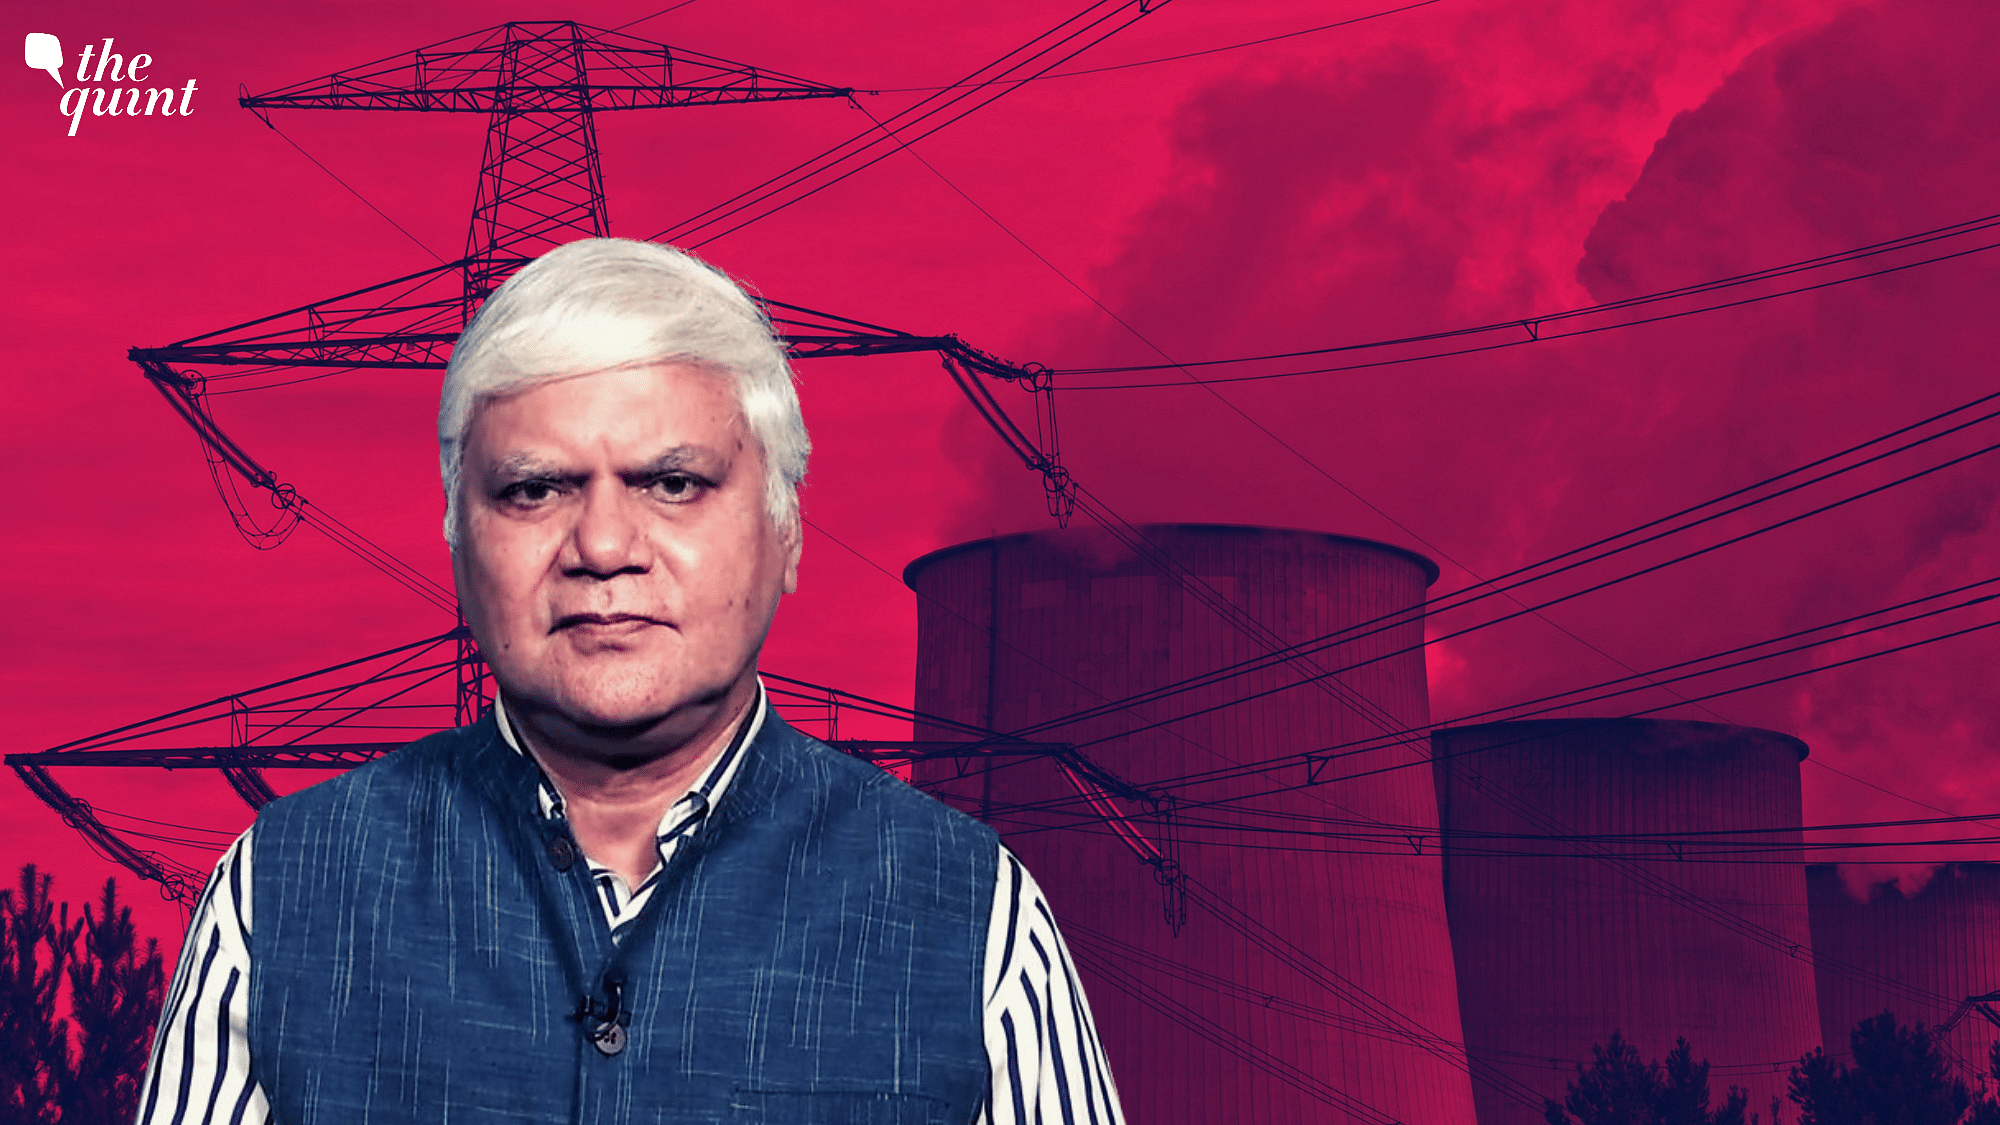 <div class="paragraphs"><p>As India's power plants face a shortage of coal supply, that might lead to a power crisis, leading energy expert Dr Narendra Taneja talks about what led to the current situation and the possible ways out of it.</p></div>